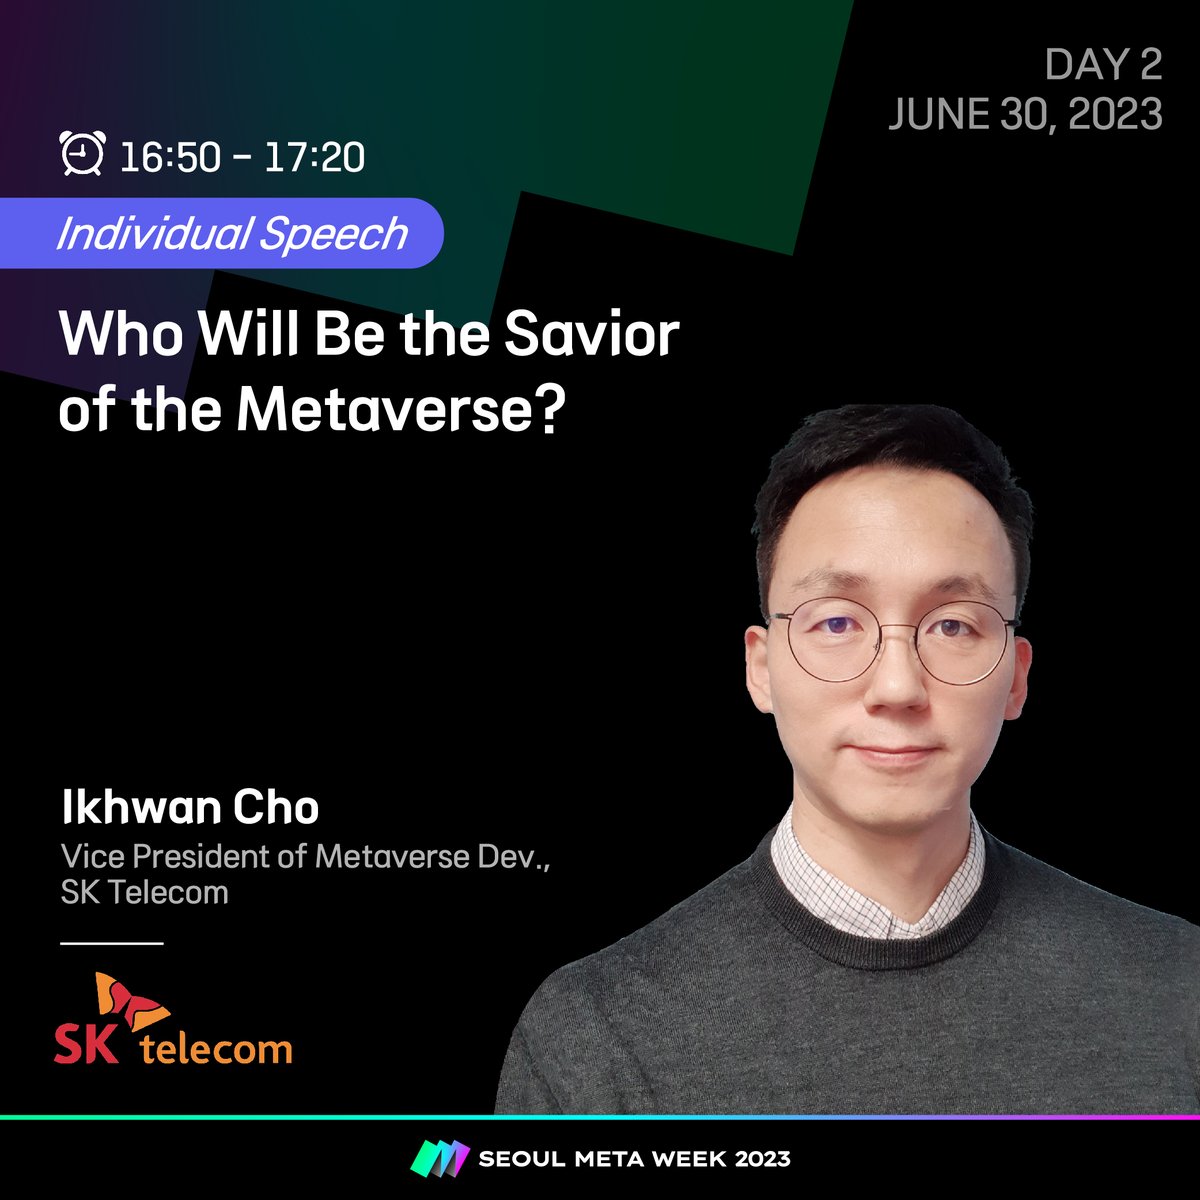 [DAY1] Individual Speech) Who Will Be the Savior of the Metaverse? ✅ Ikhwan Cho Vice President of Metaverse Dev.,SK Telecom